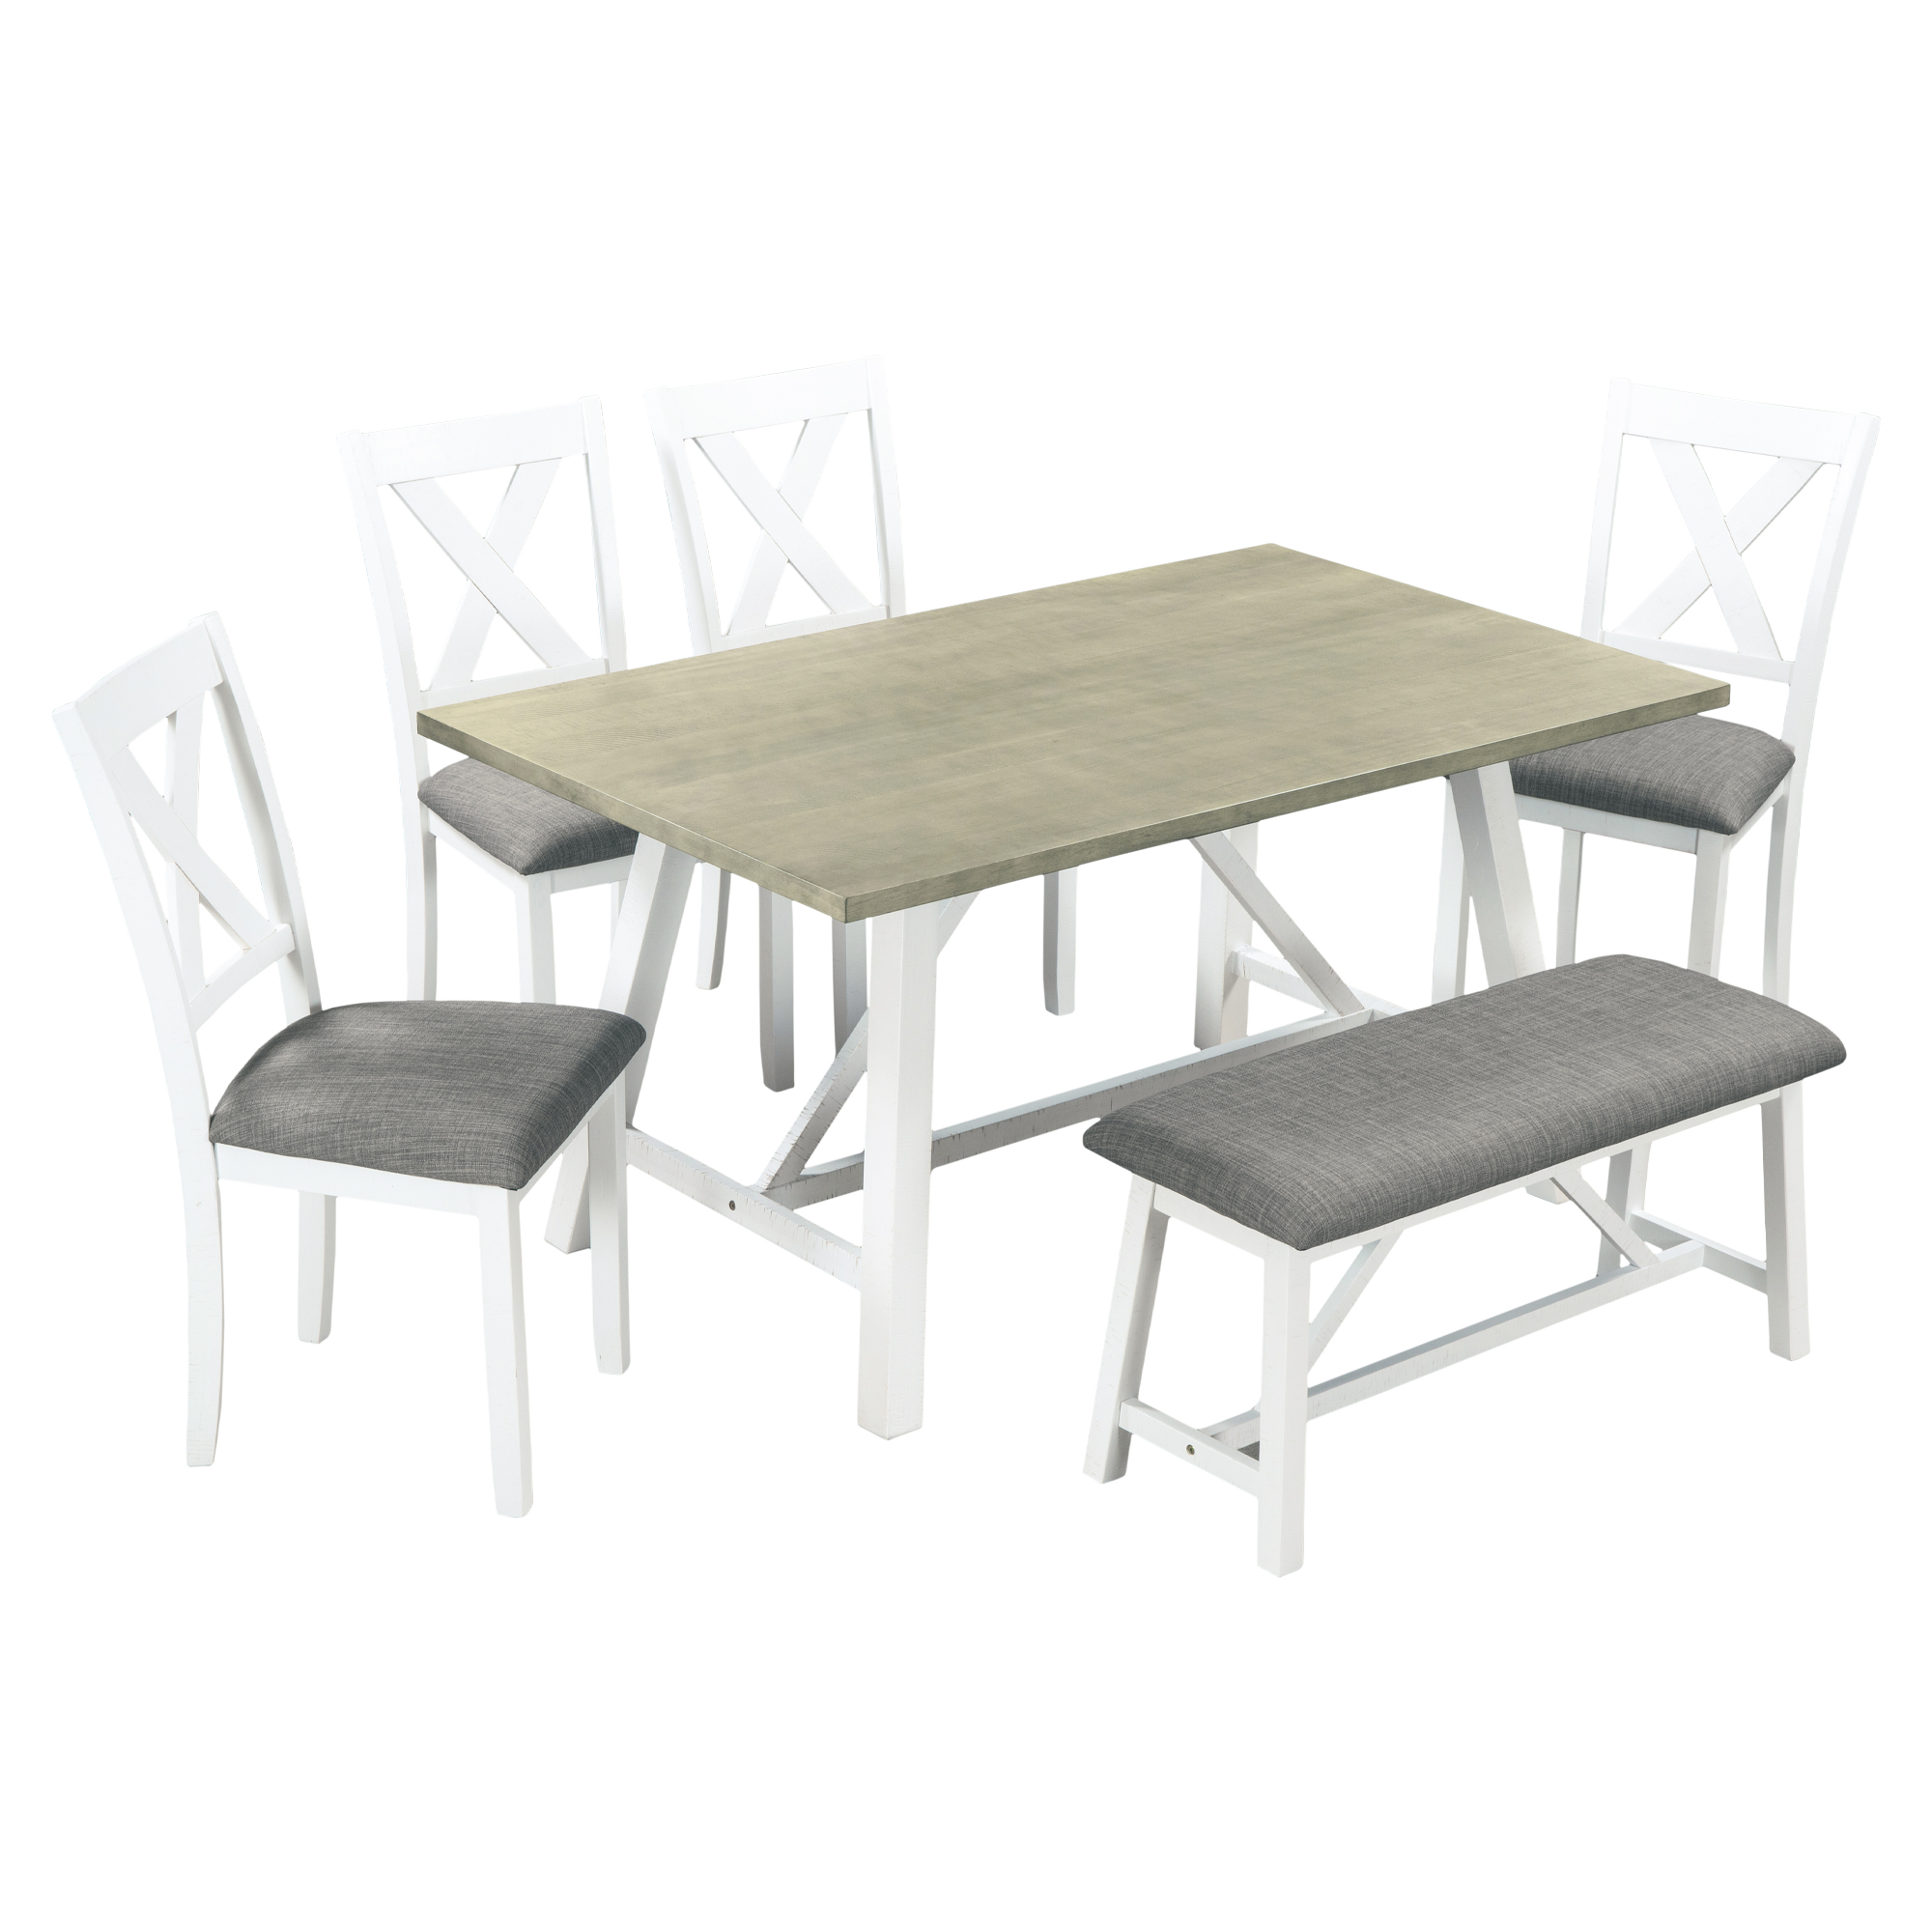 Rustic Style 6 Piece Dining Table Set - SH001091AAK